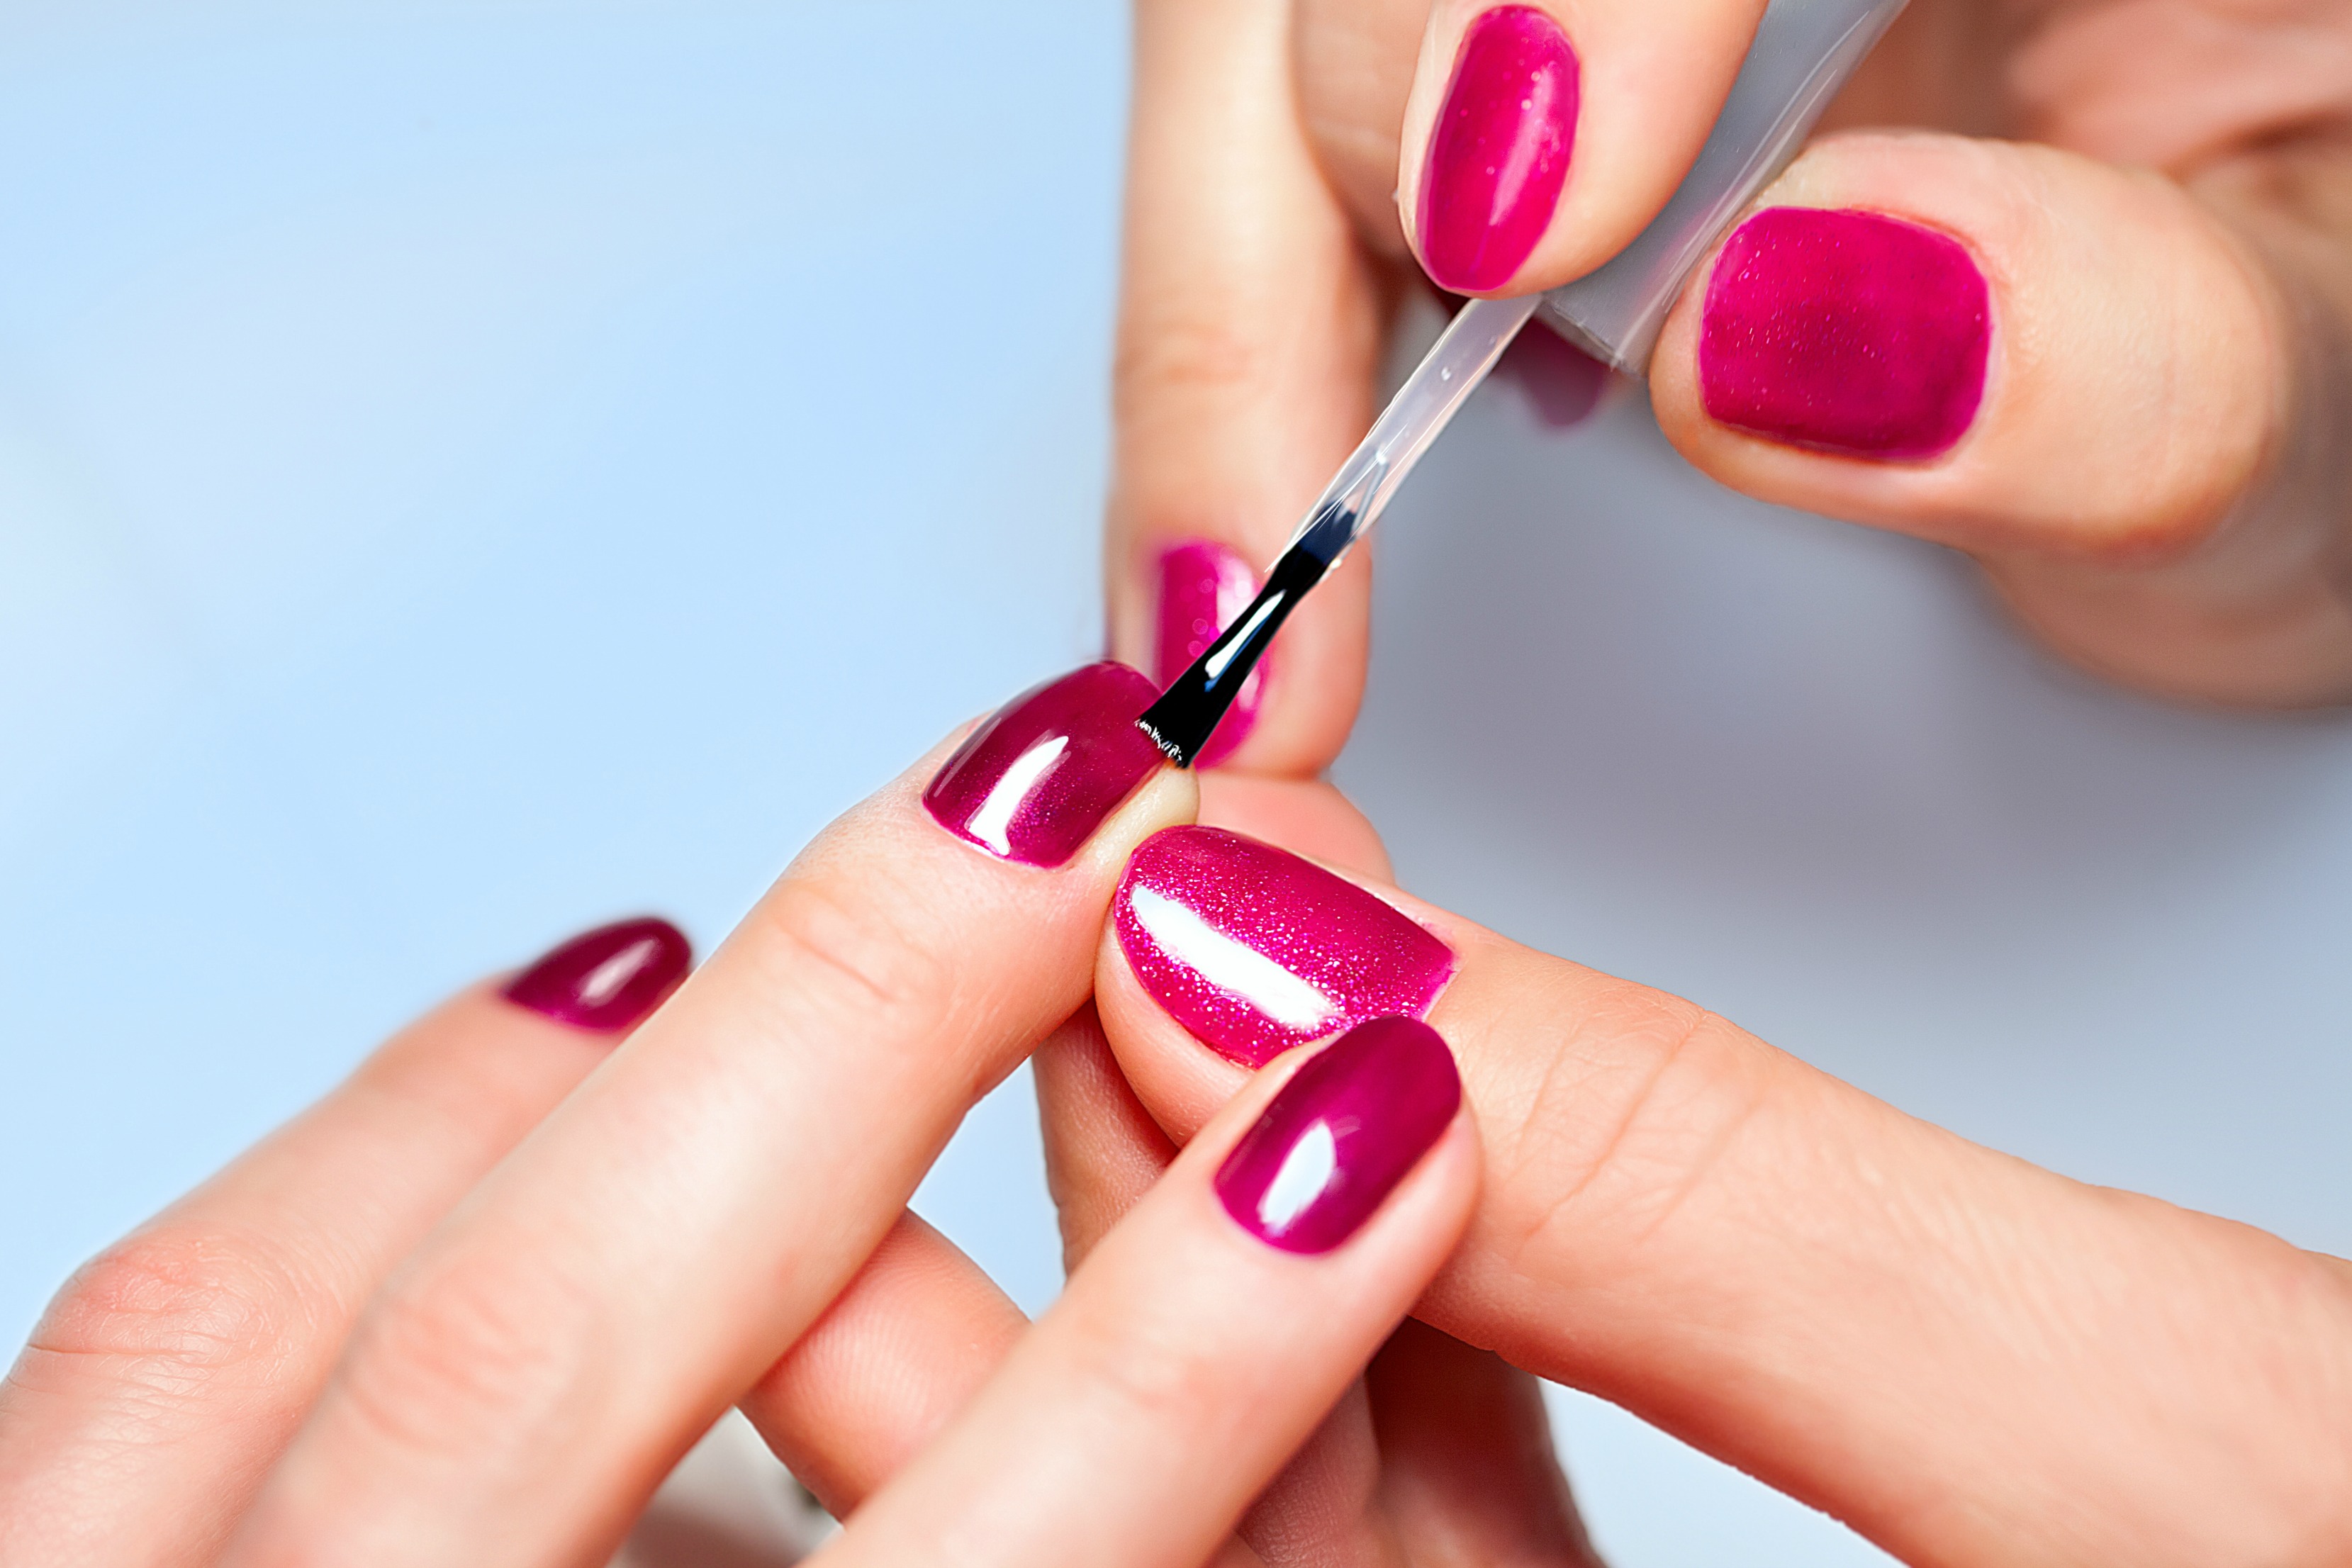 5. Step-by-Step Nail Art Guide - wide 5